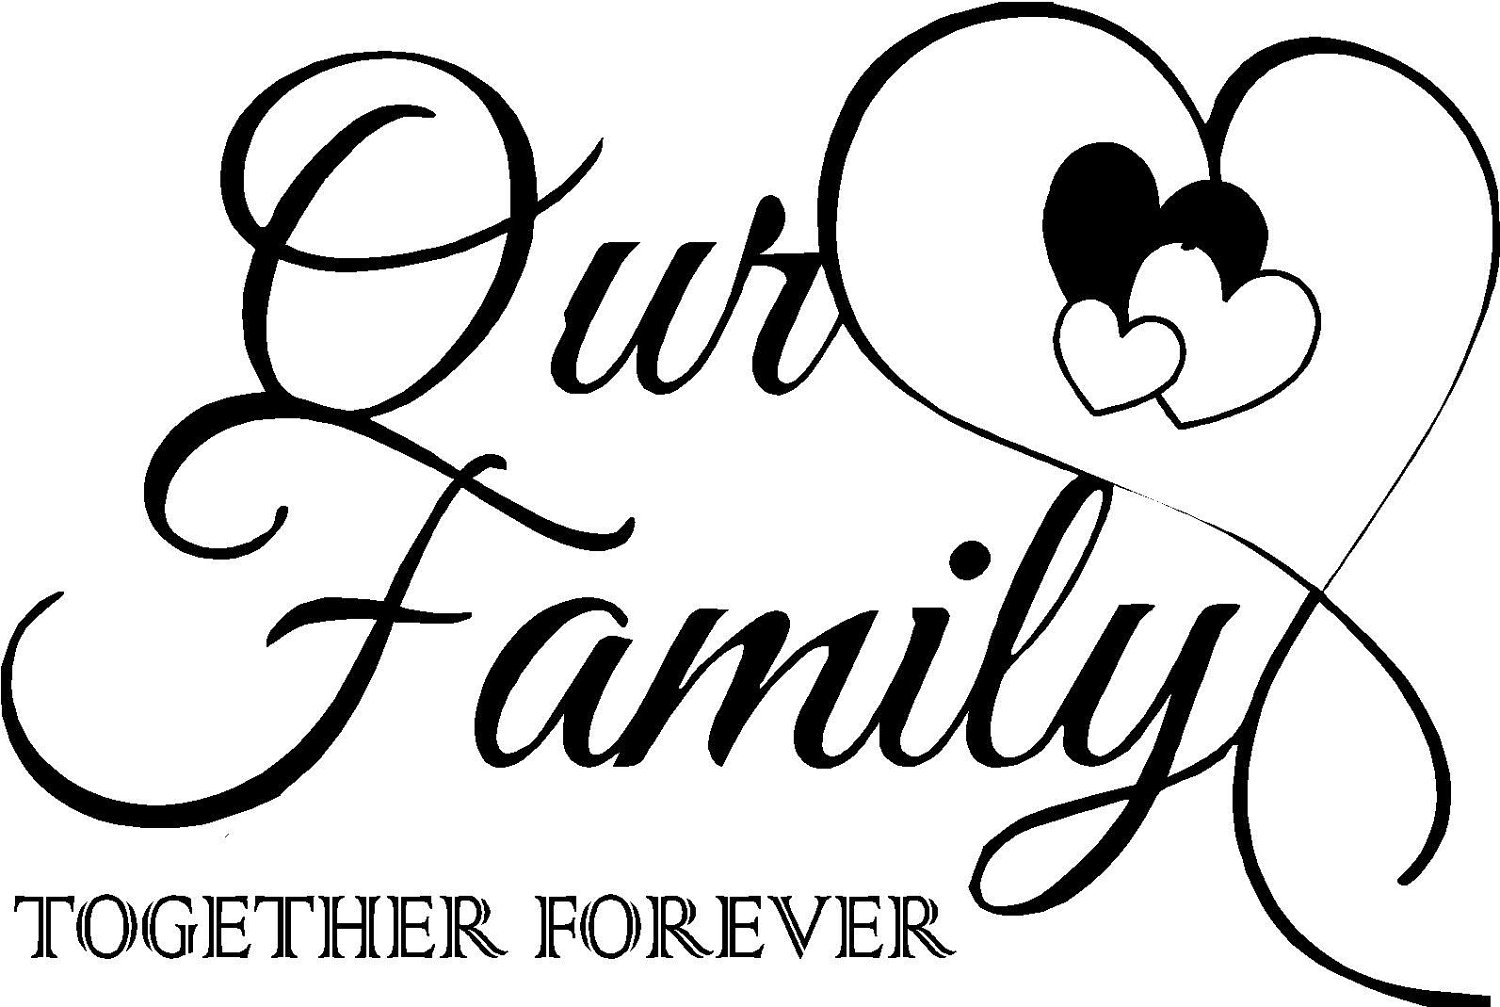 Family Get Together Quotes. QuotesGram